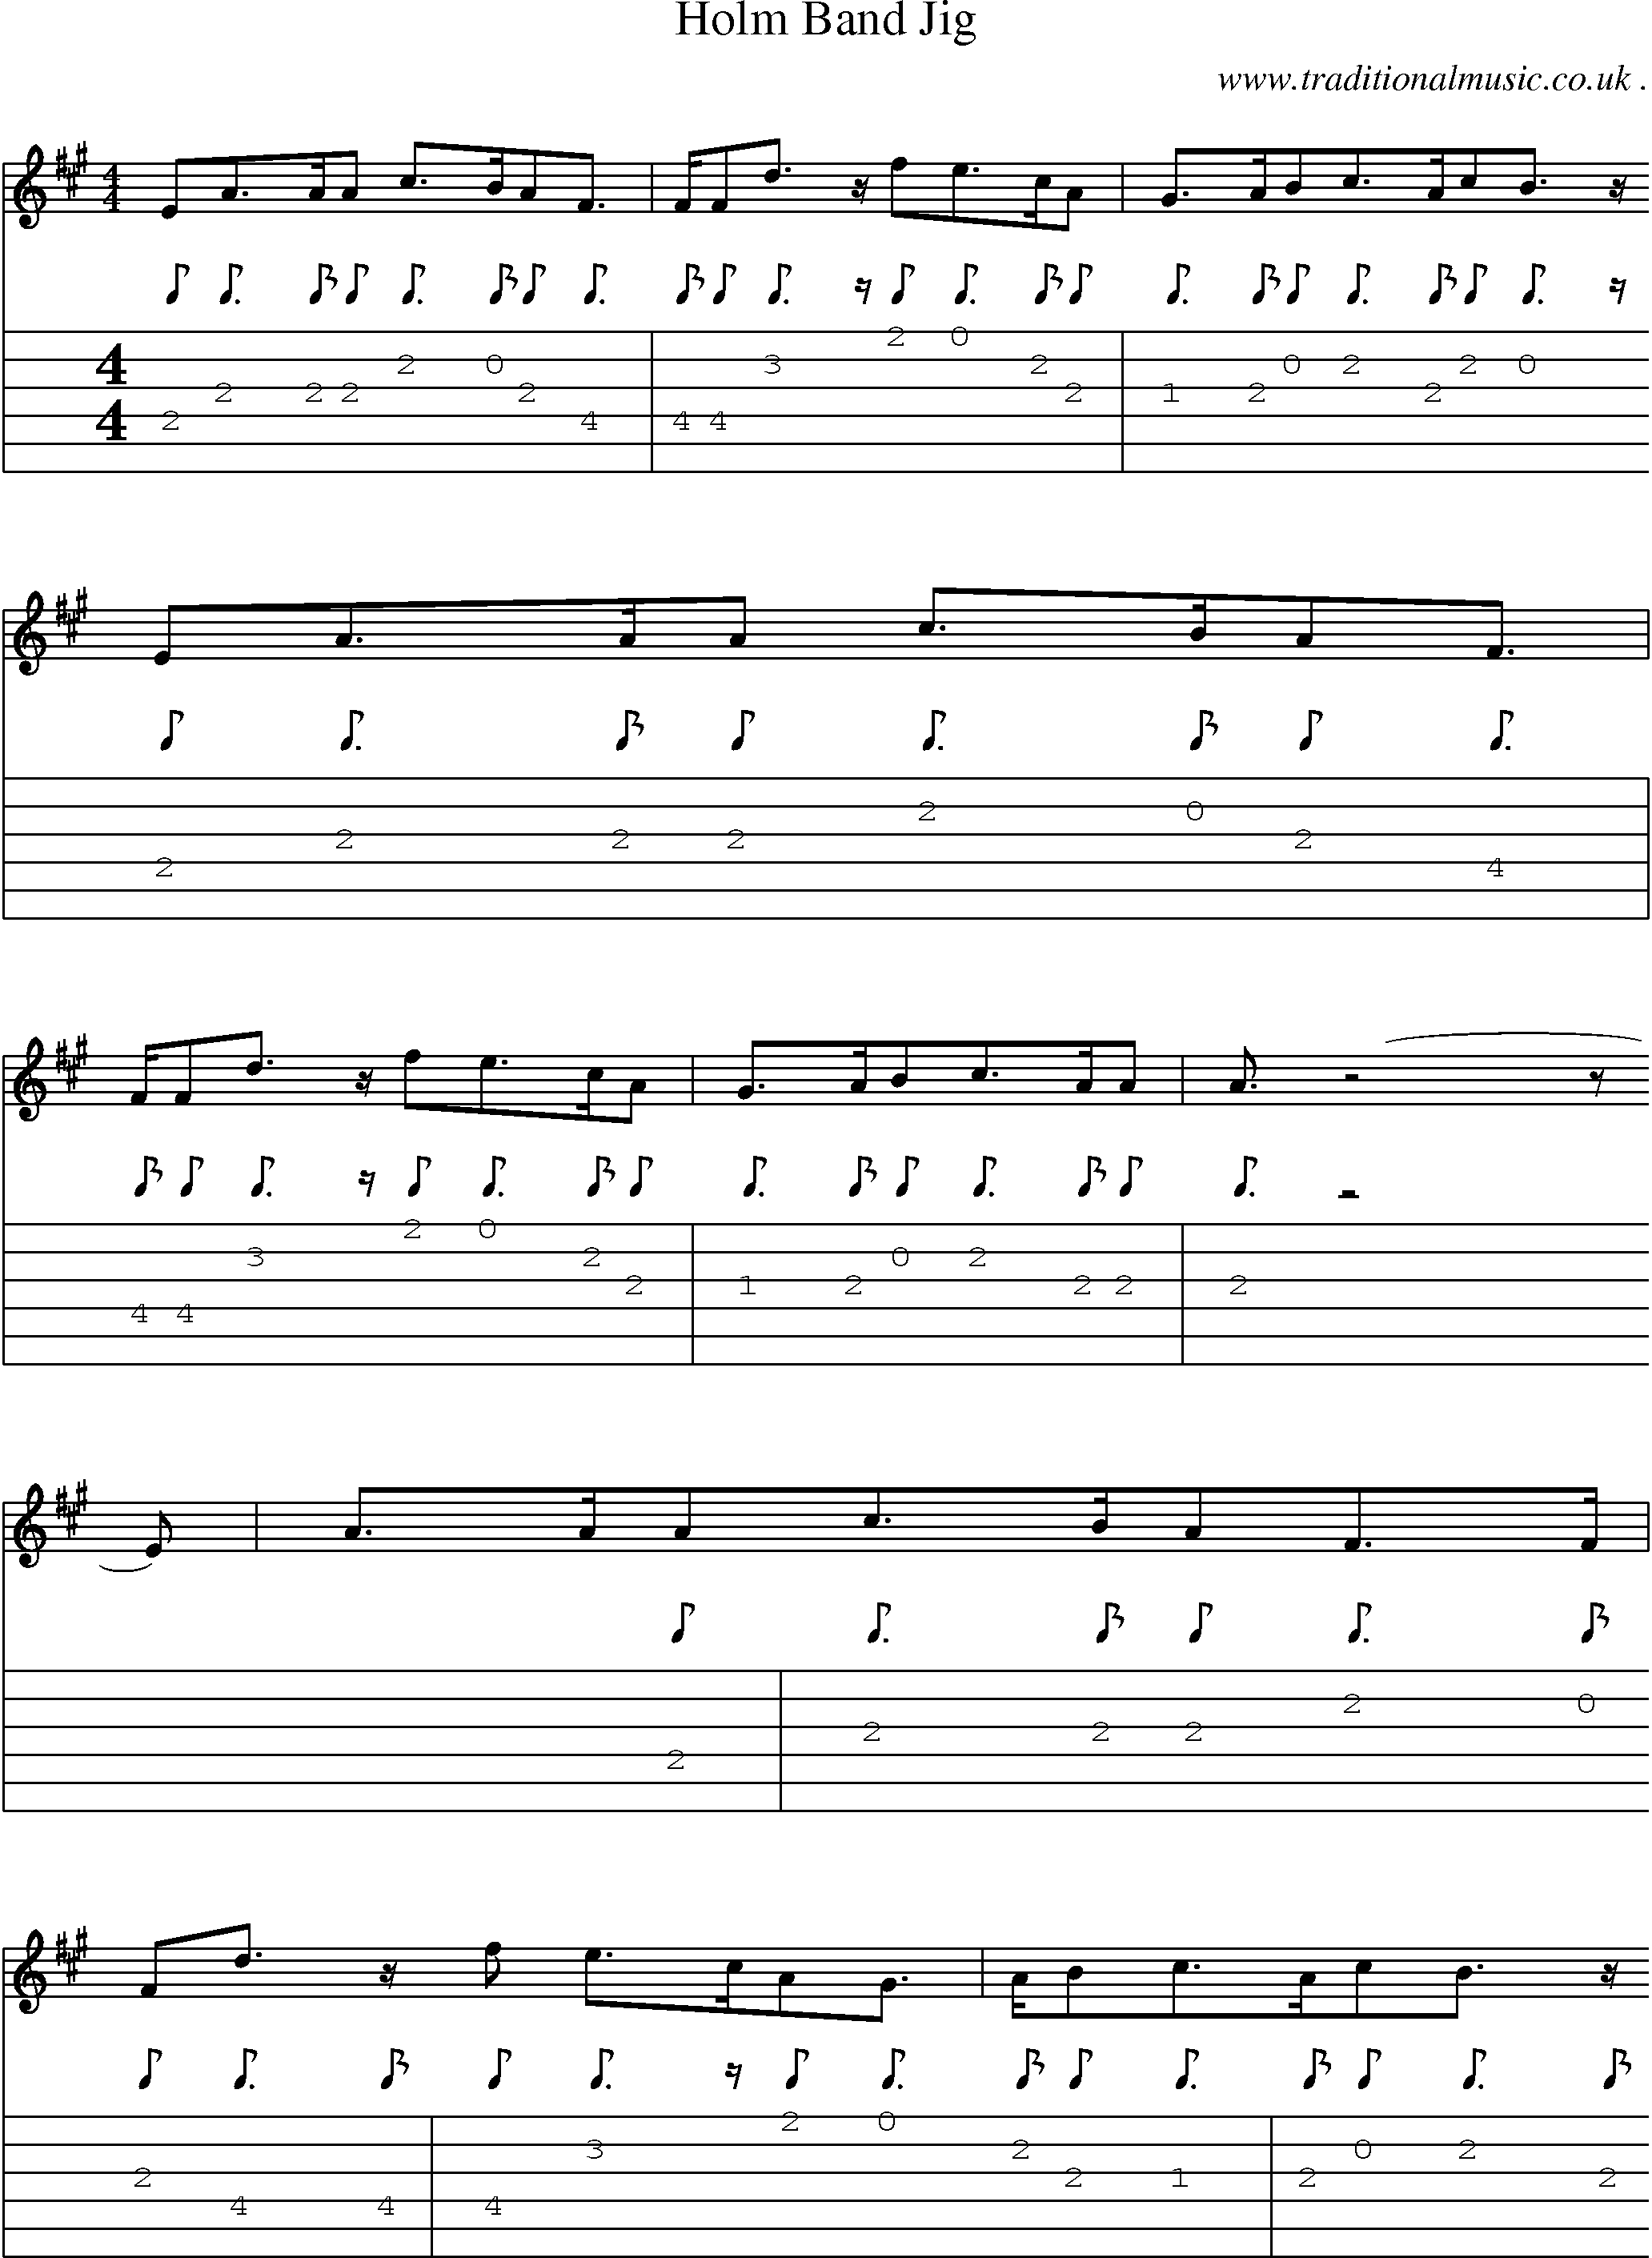 Sheet-music  score, Chords and Guitar Tabs for Holm Band Jig